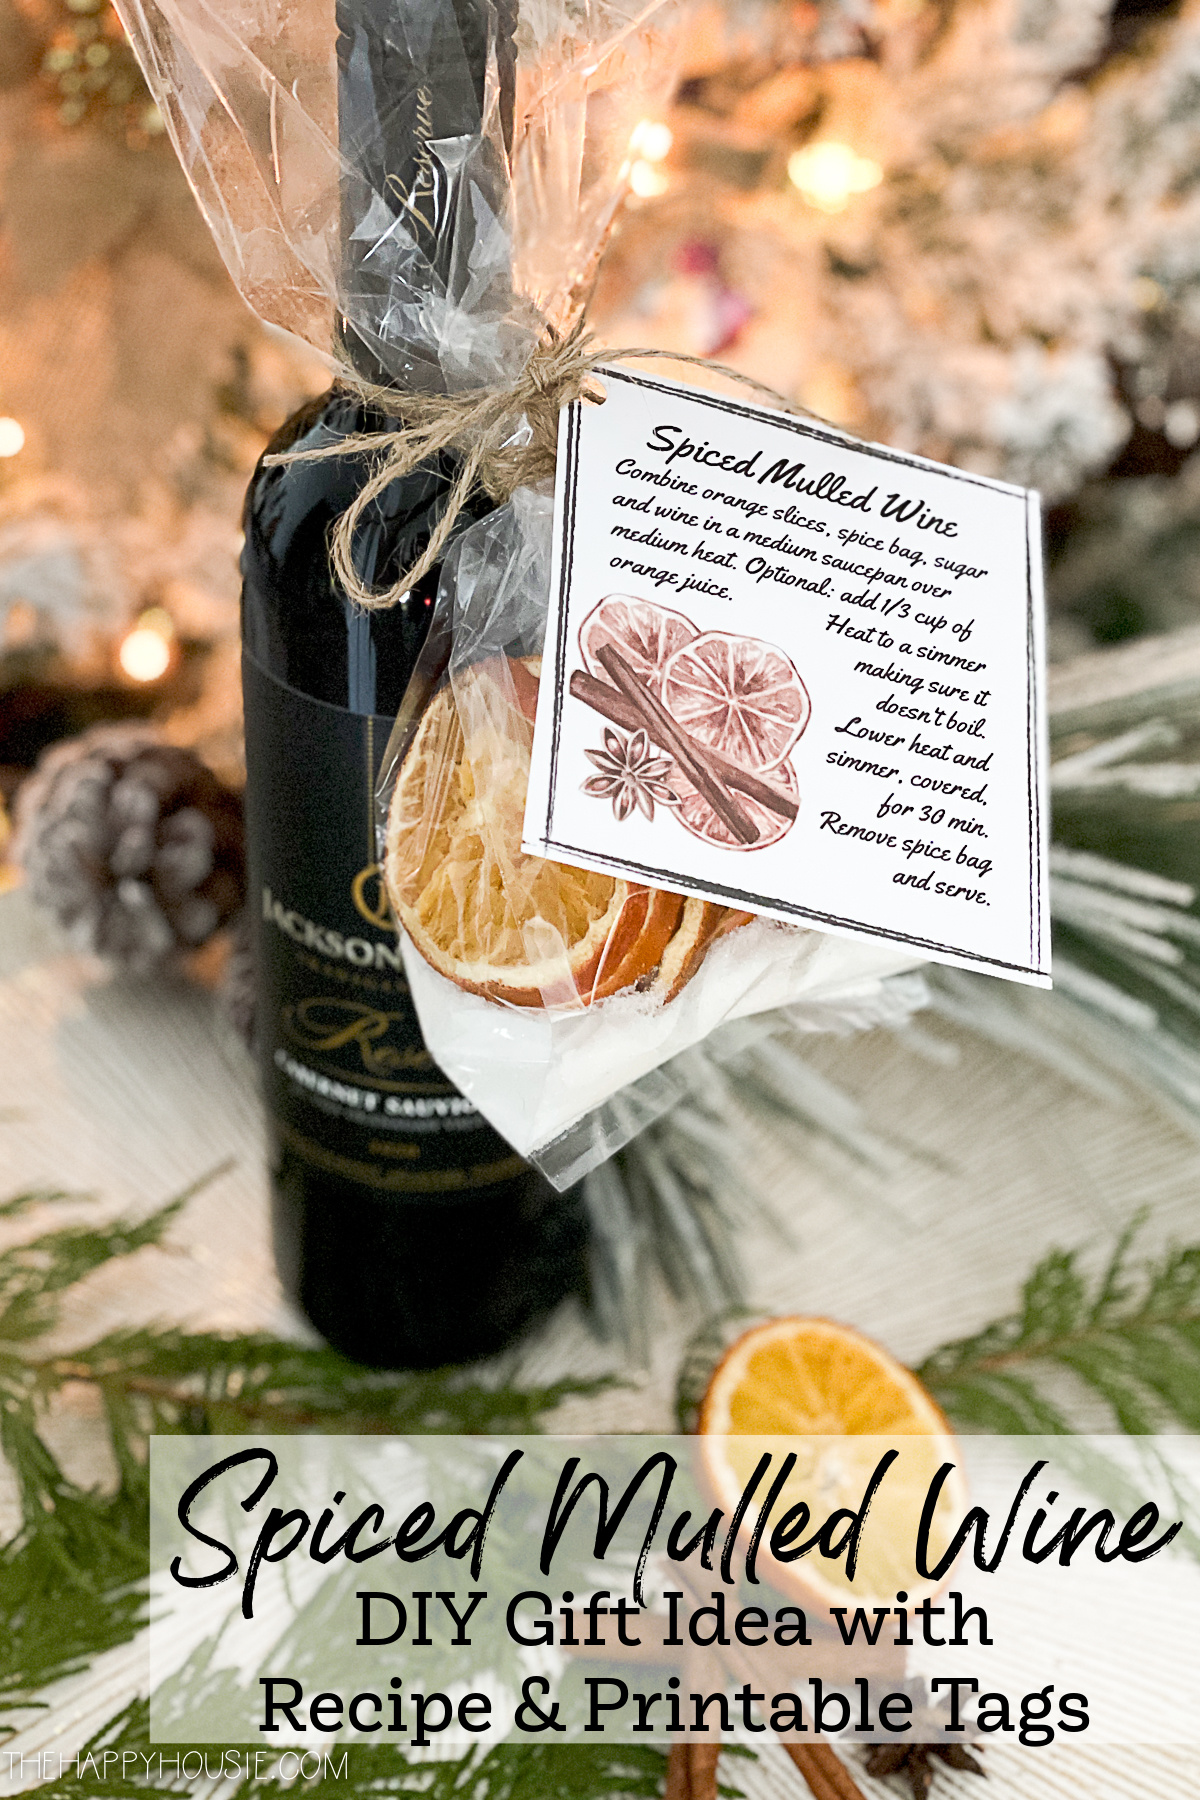 spiced mulled wine DIY gift idea with recipe and printable tags